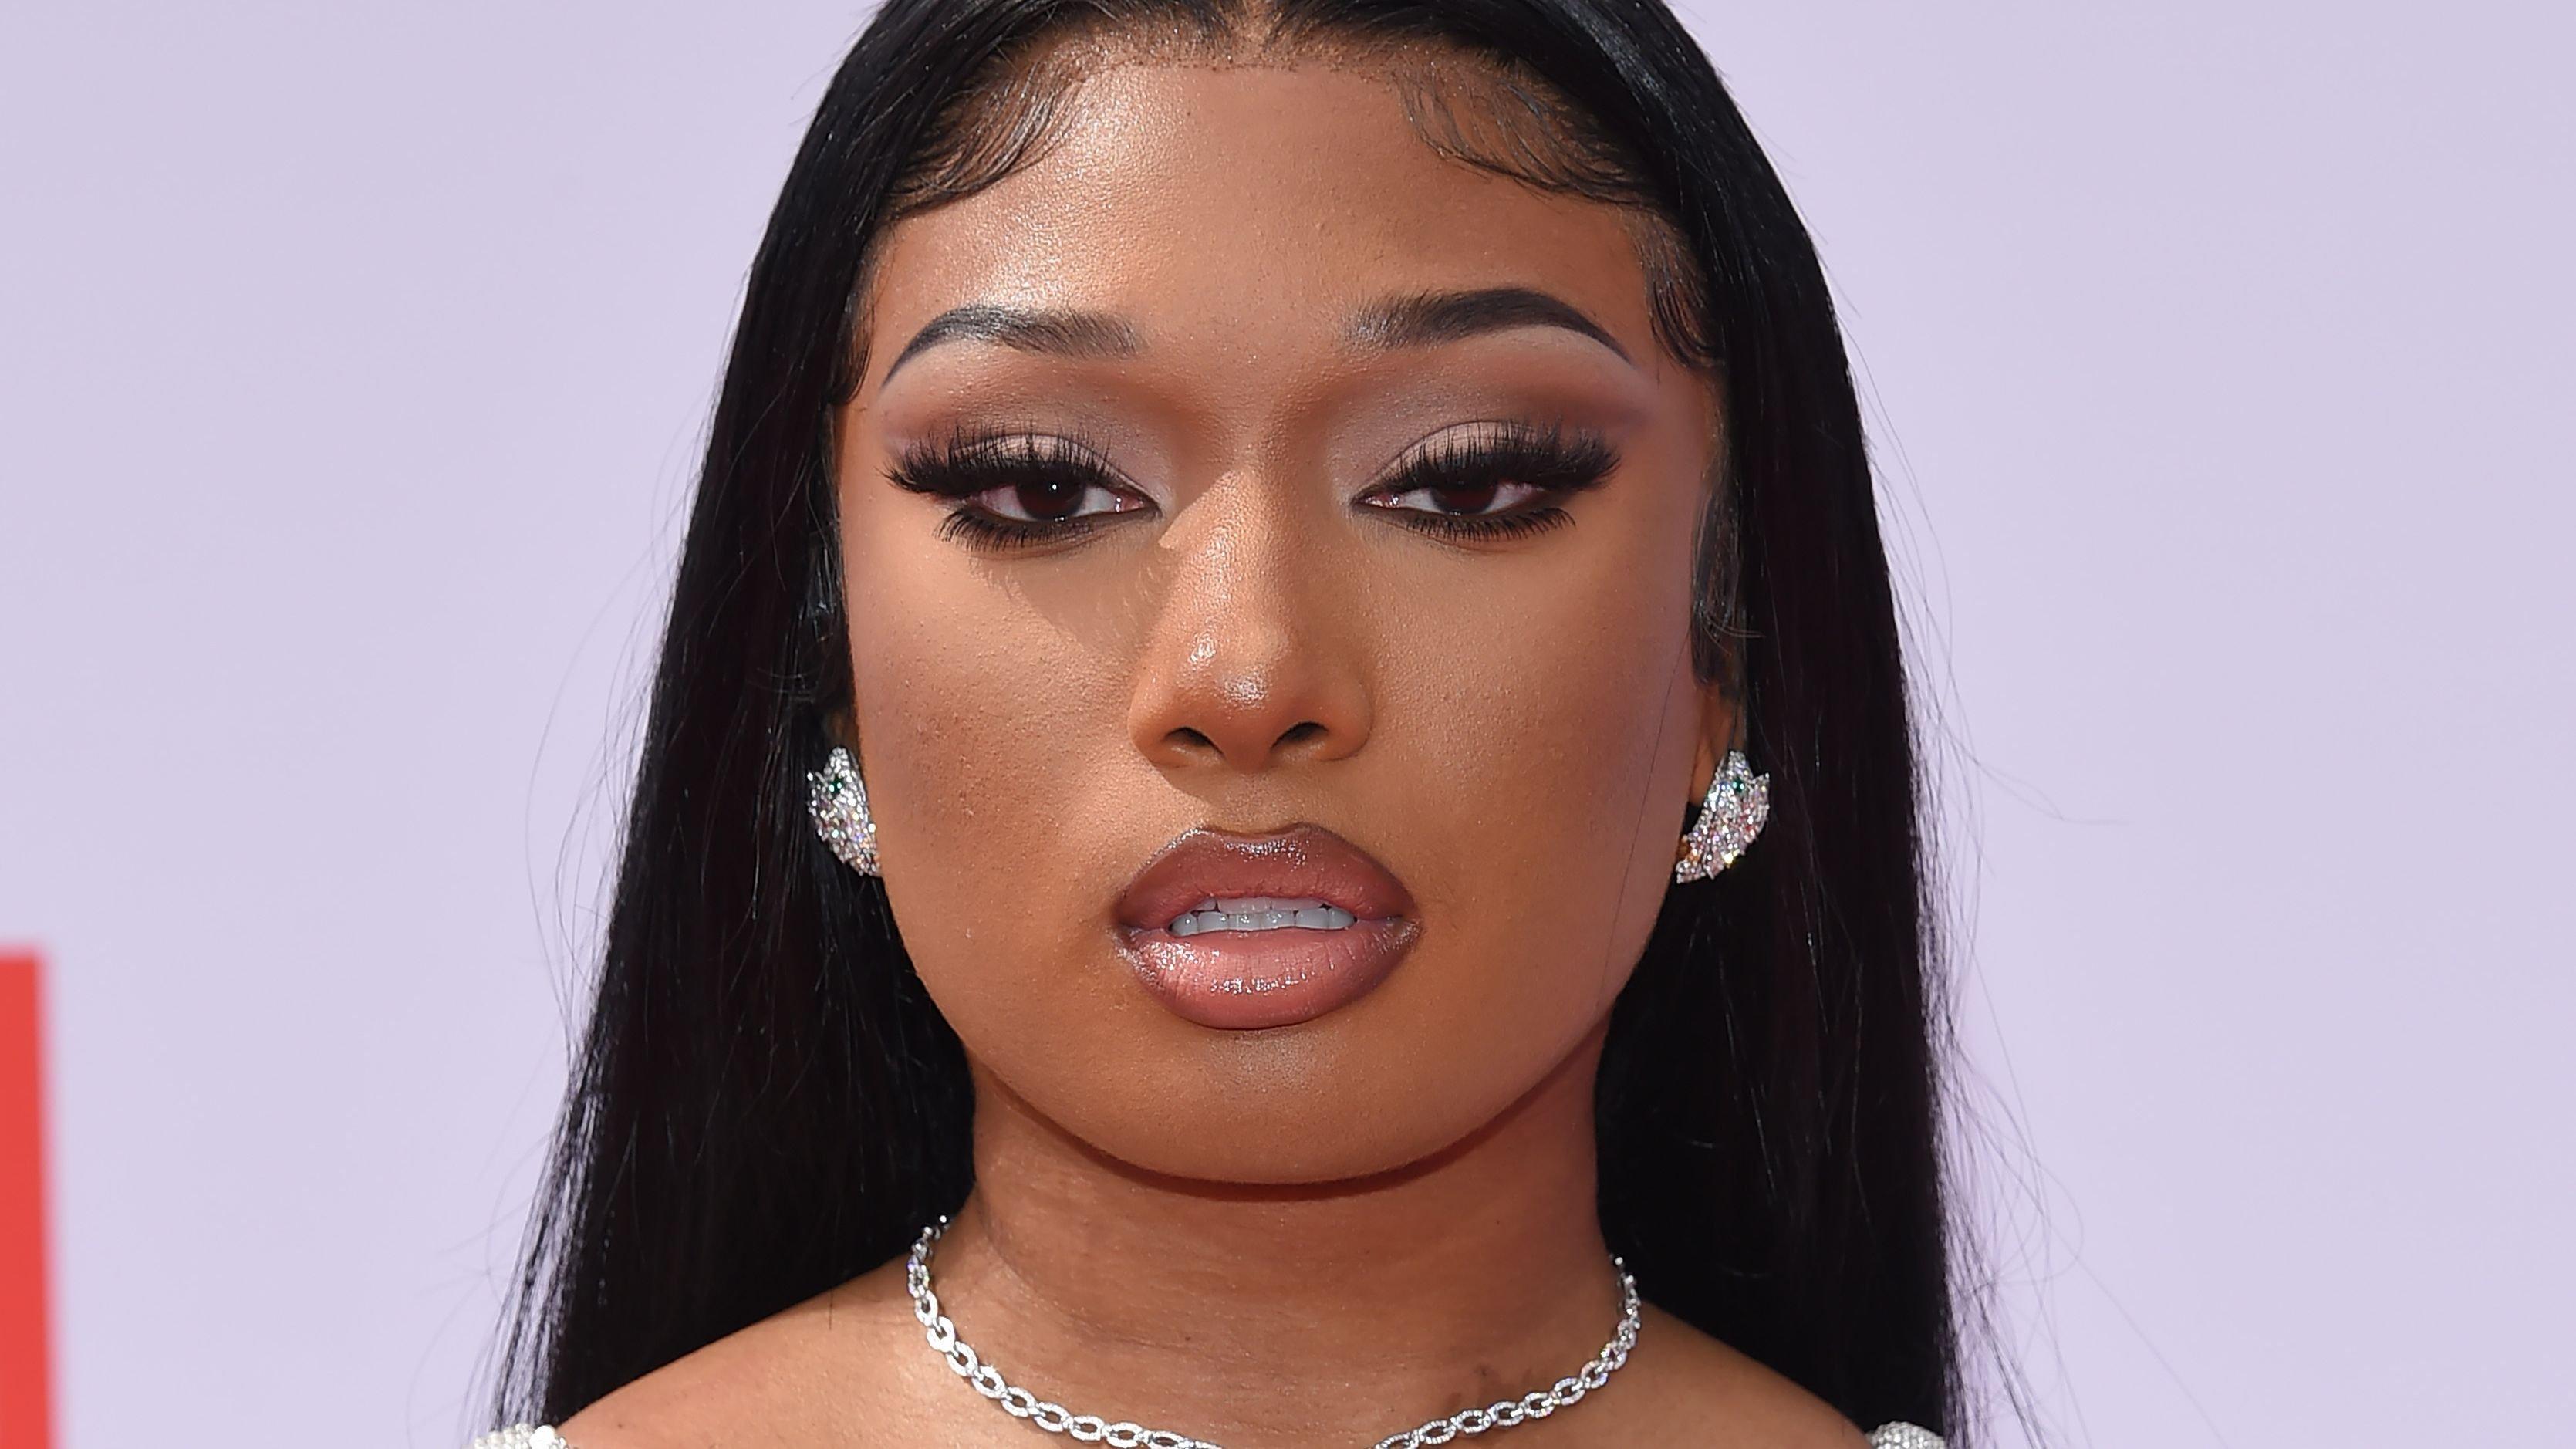 Megan Thee Stallion rocks slicked-back hair,  bedazzled strappy dress, diamond earrings, and necklace at an event.